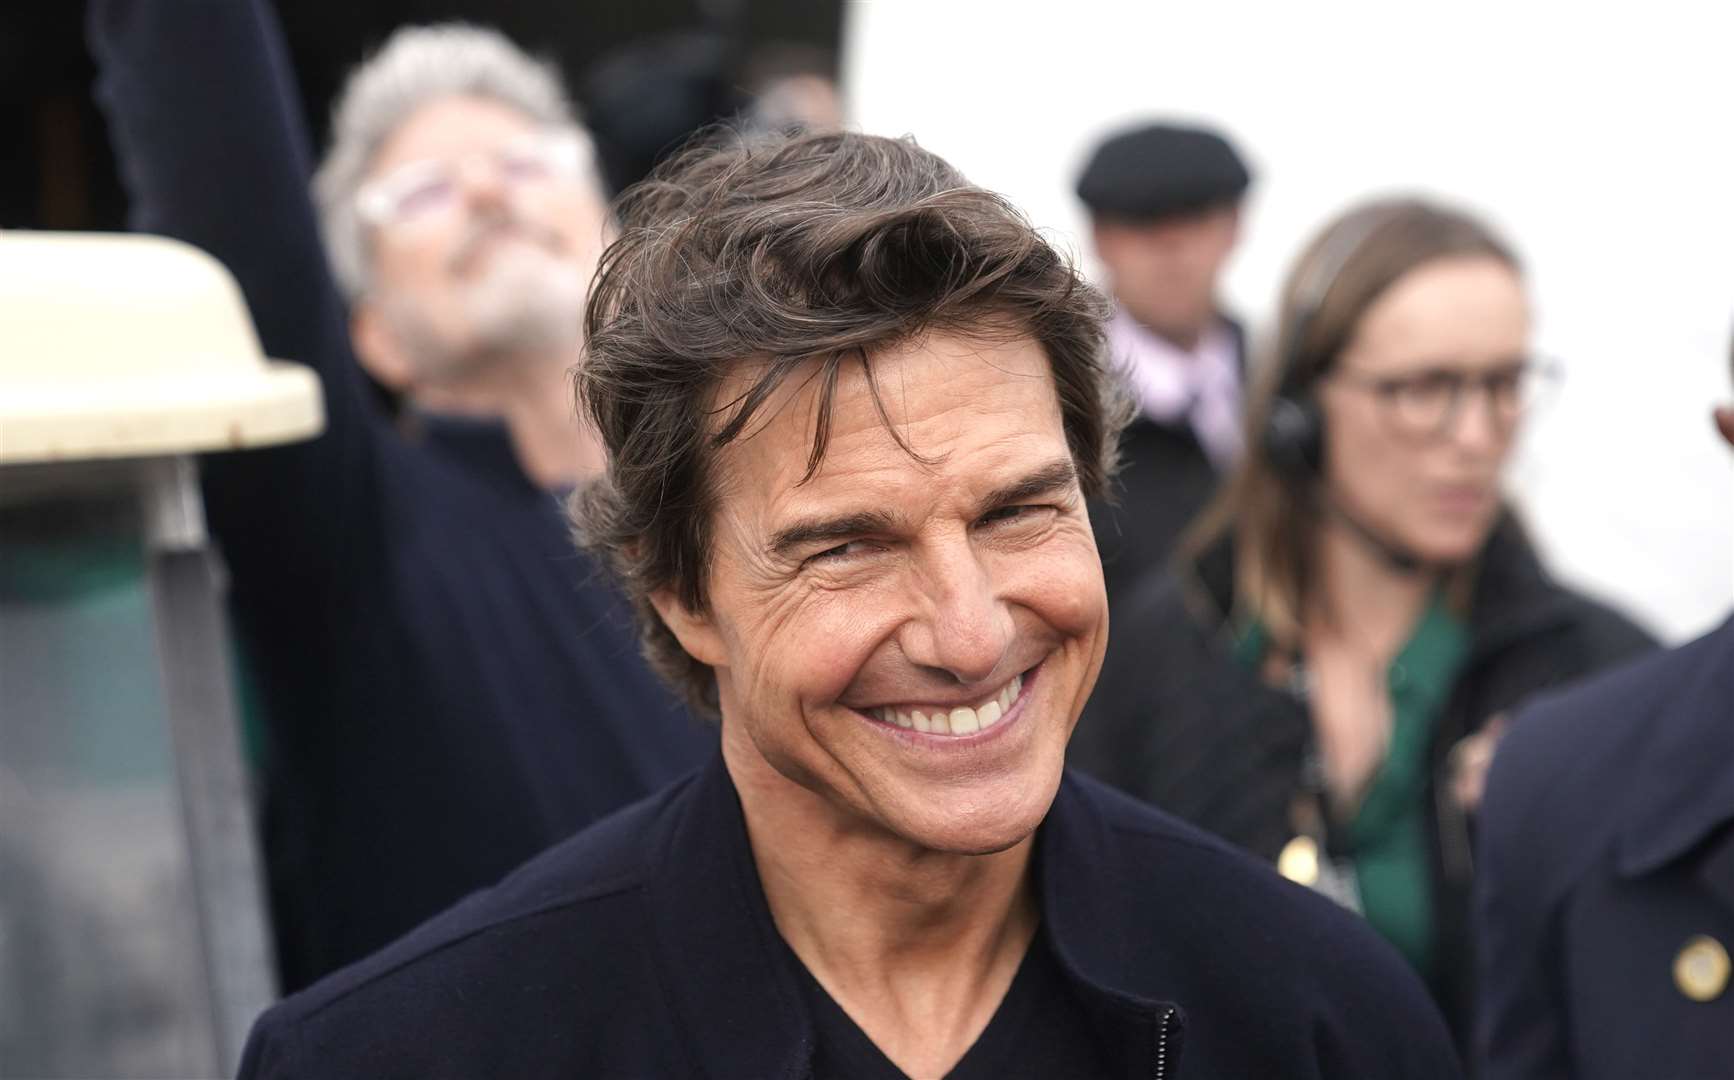 Tom Cruise will make an appearance via video (Steve Parsons/PA)